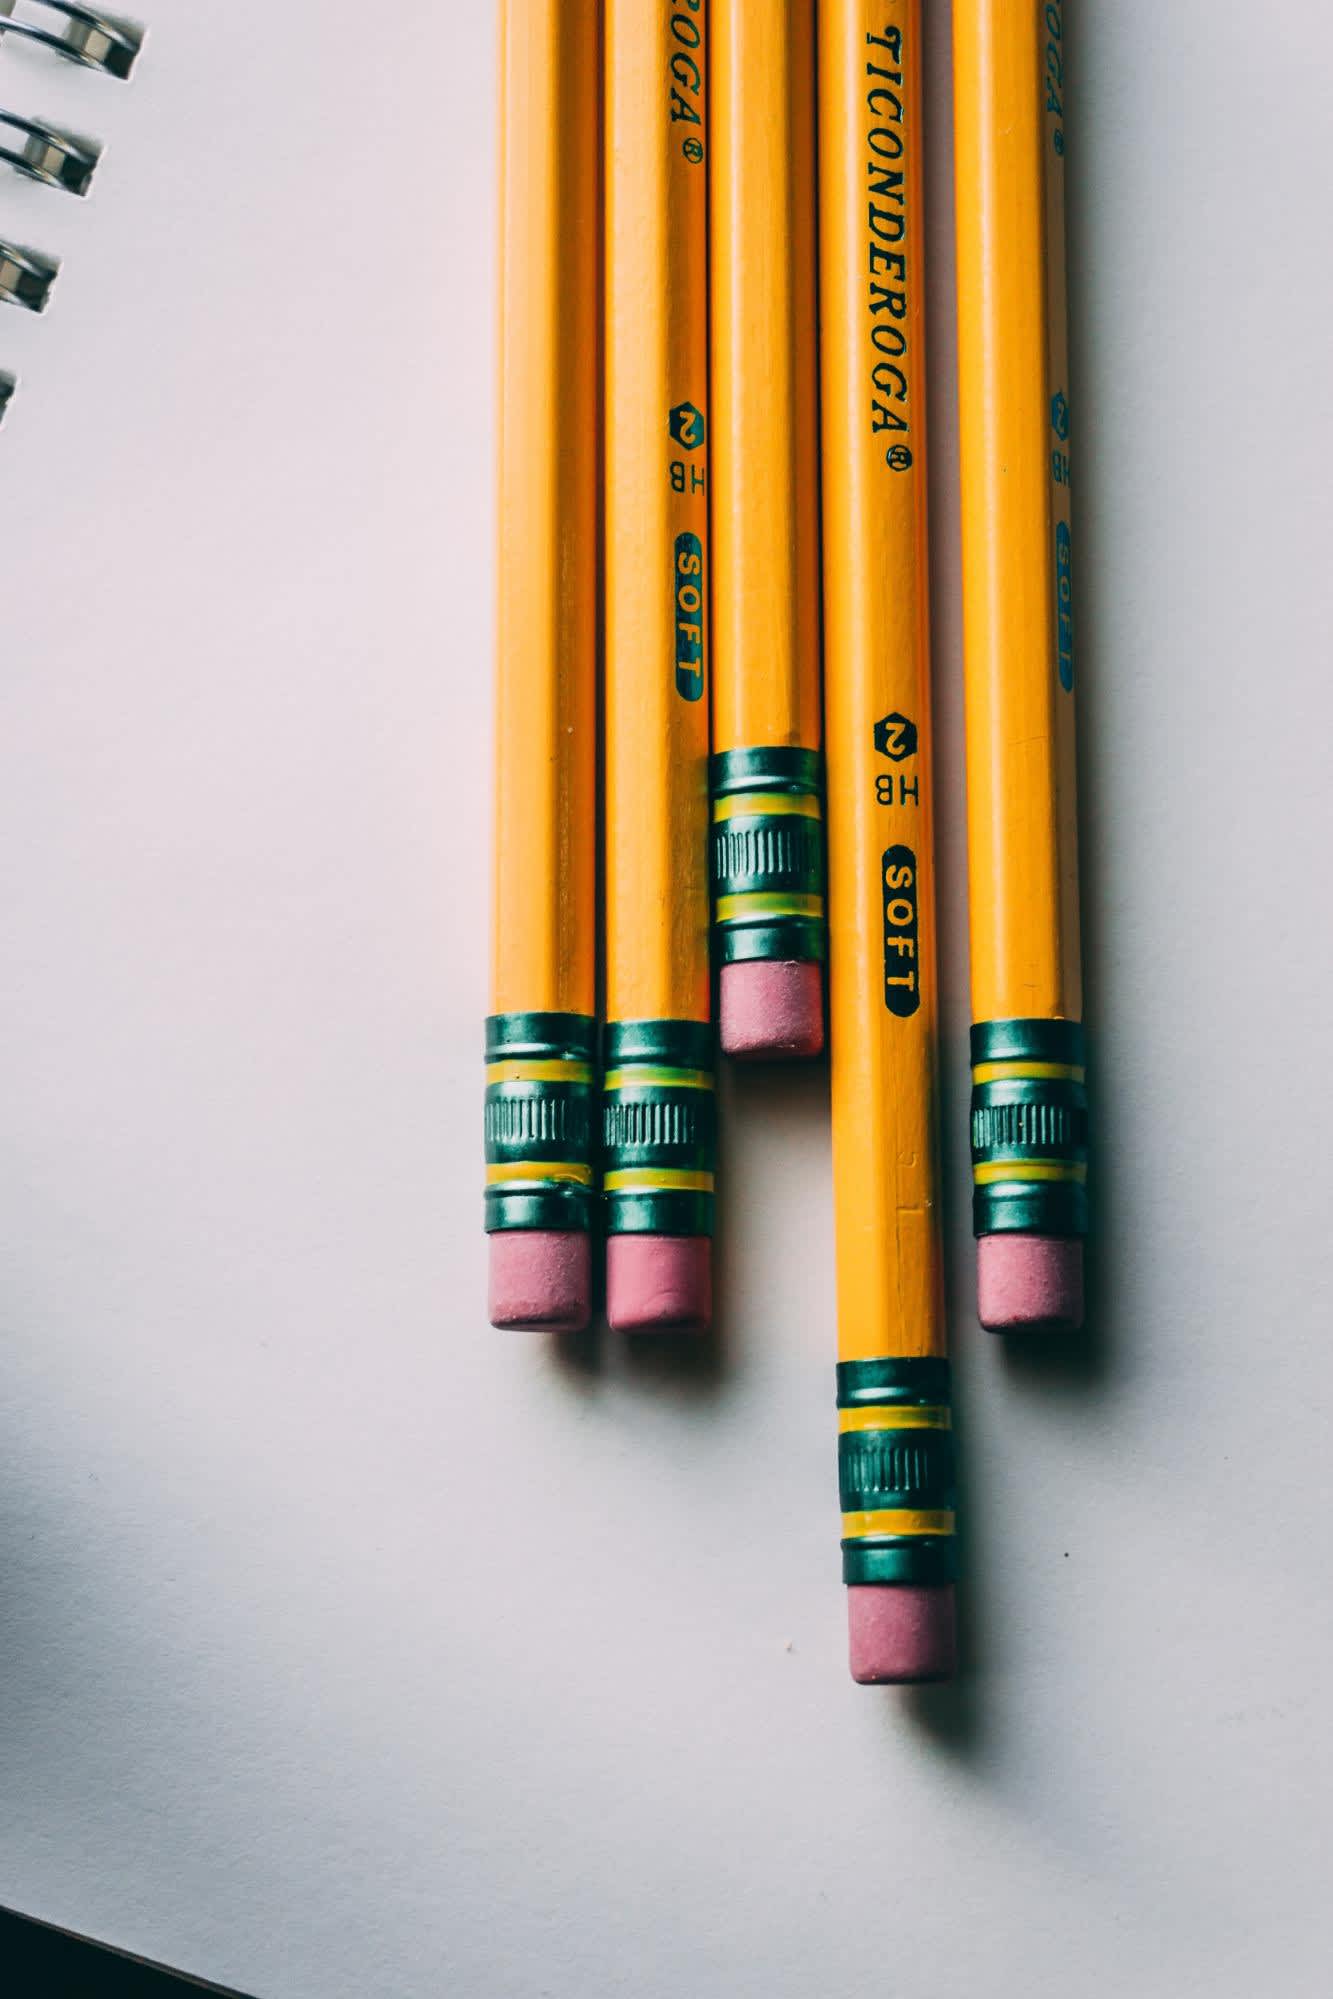 Pencils in a row on a notebook